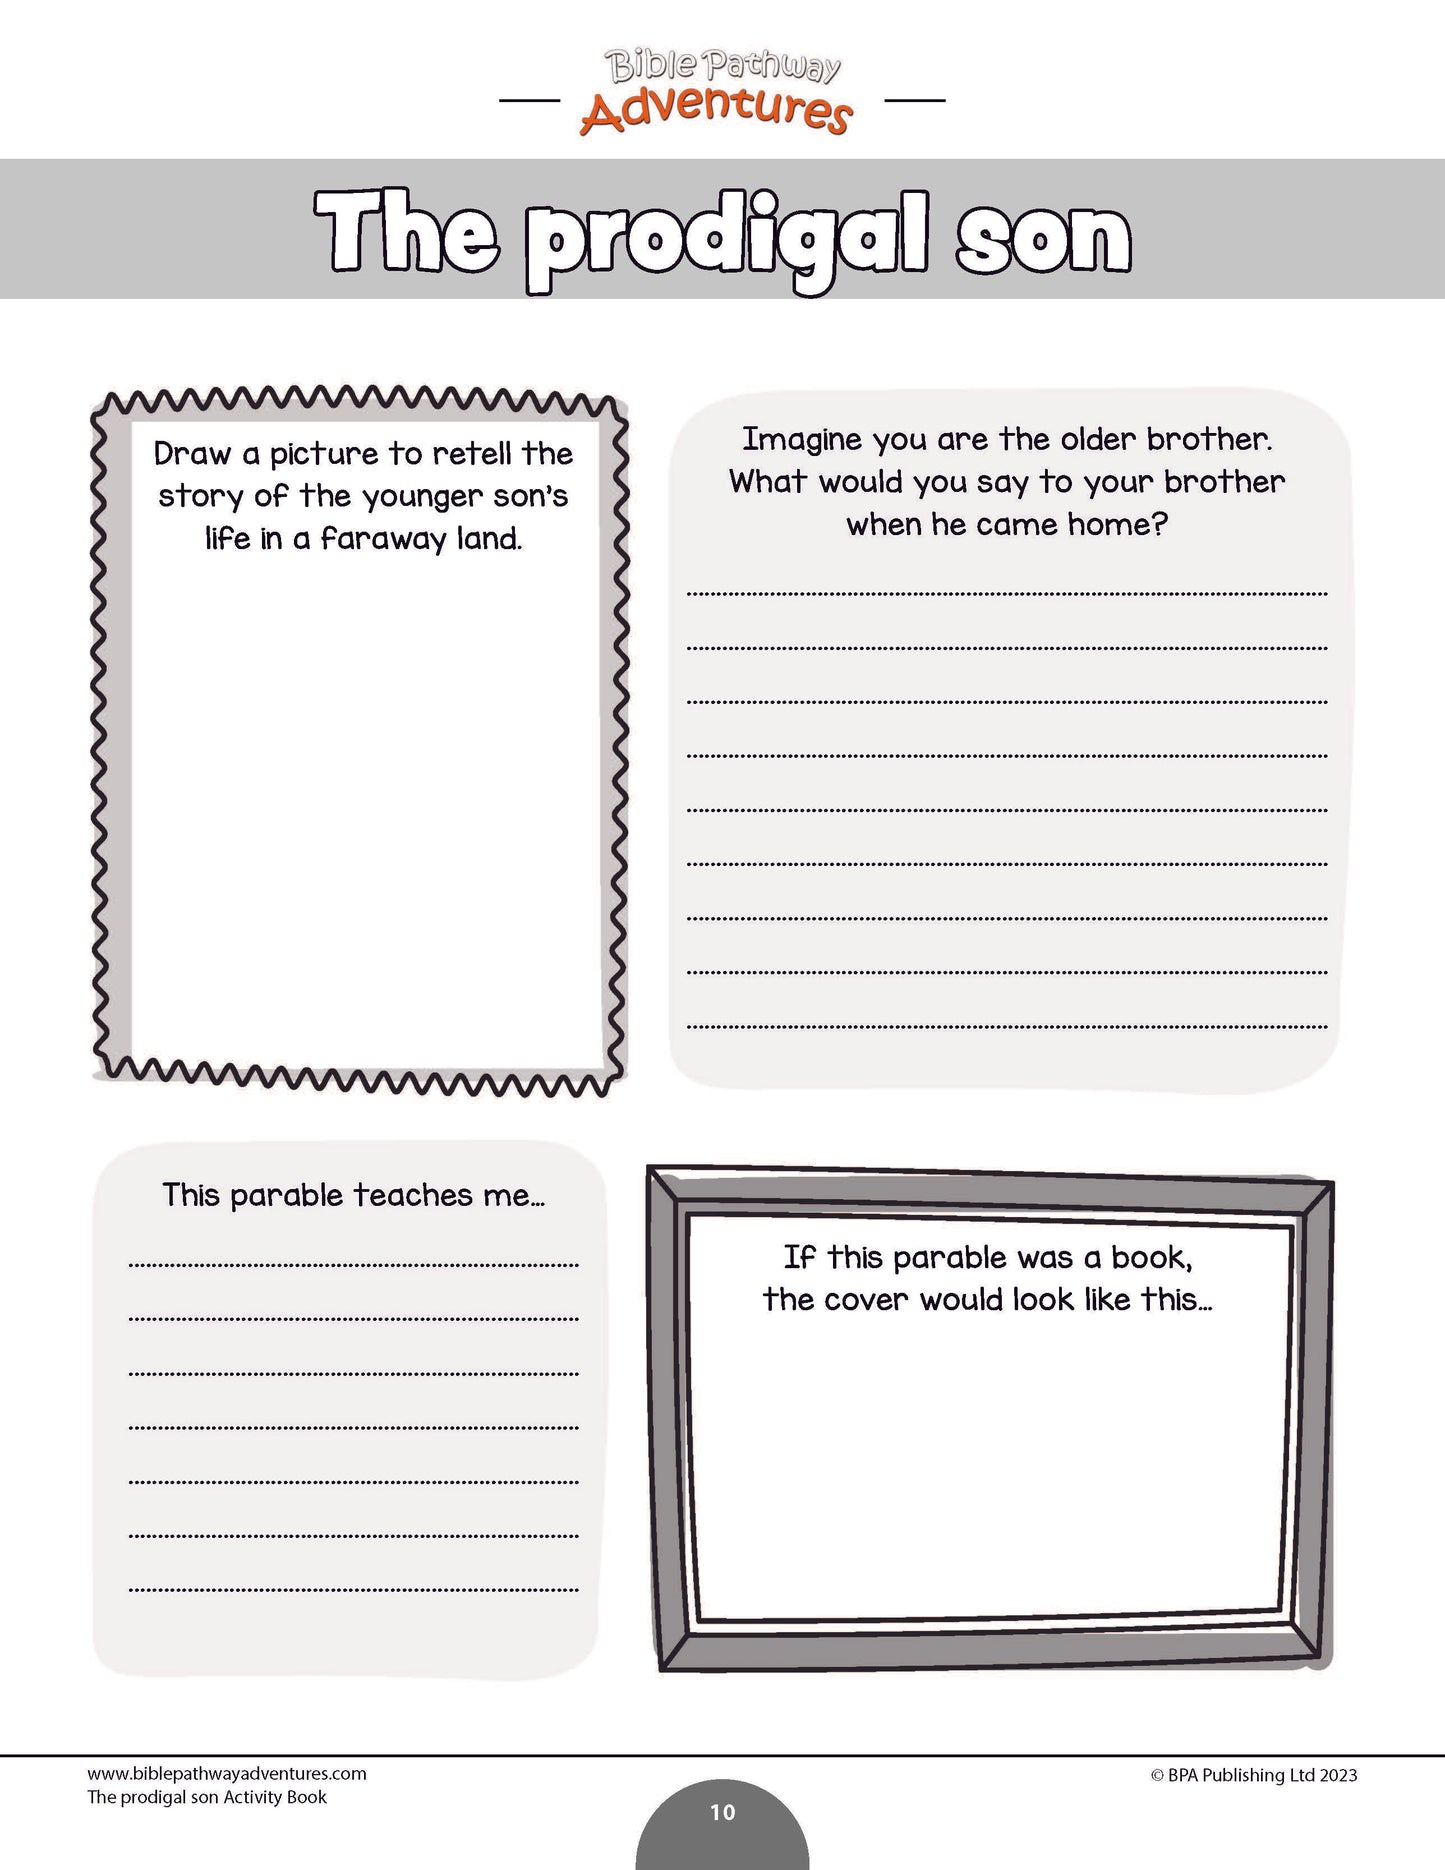 Parable of the Prodigal Son Activity Book